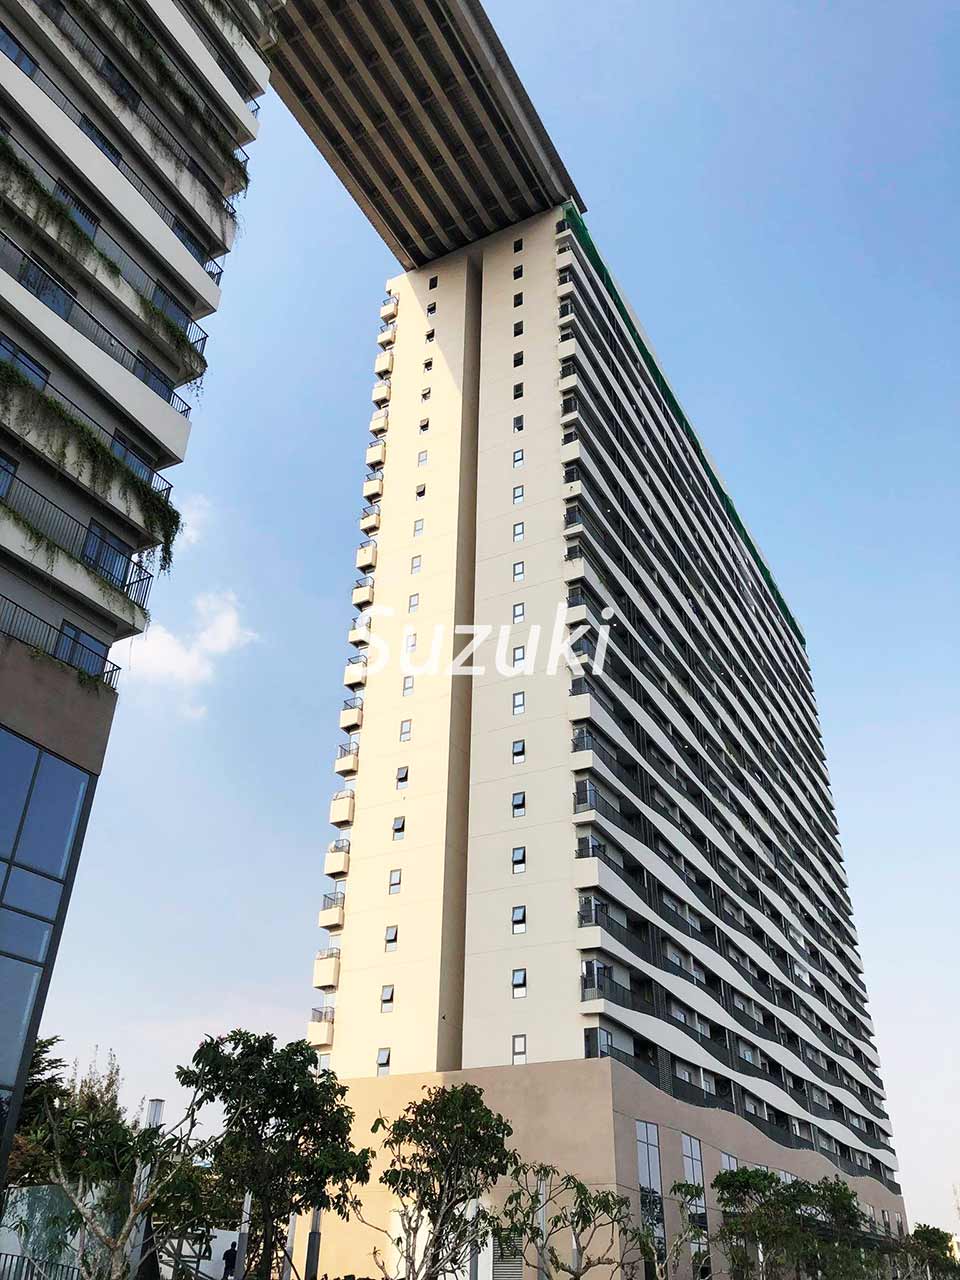 Diamond Lotus Riverside | Japanese owner, condominium in District 8 of Ho Chi Minh City (purchased / resold), affordable price [contracted / sold]